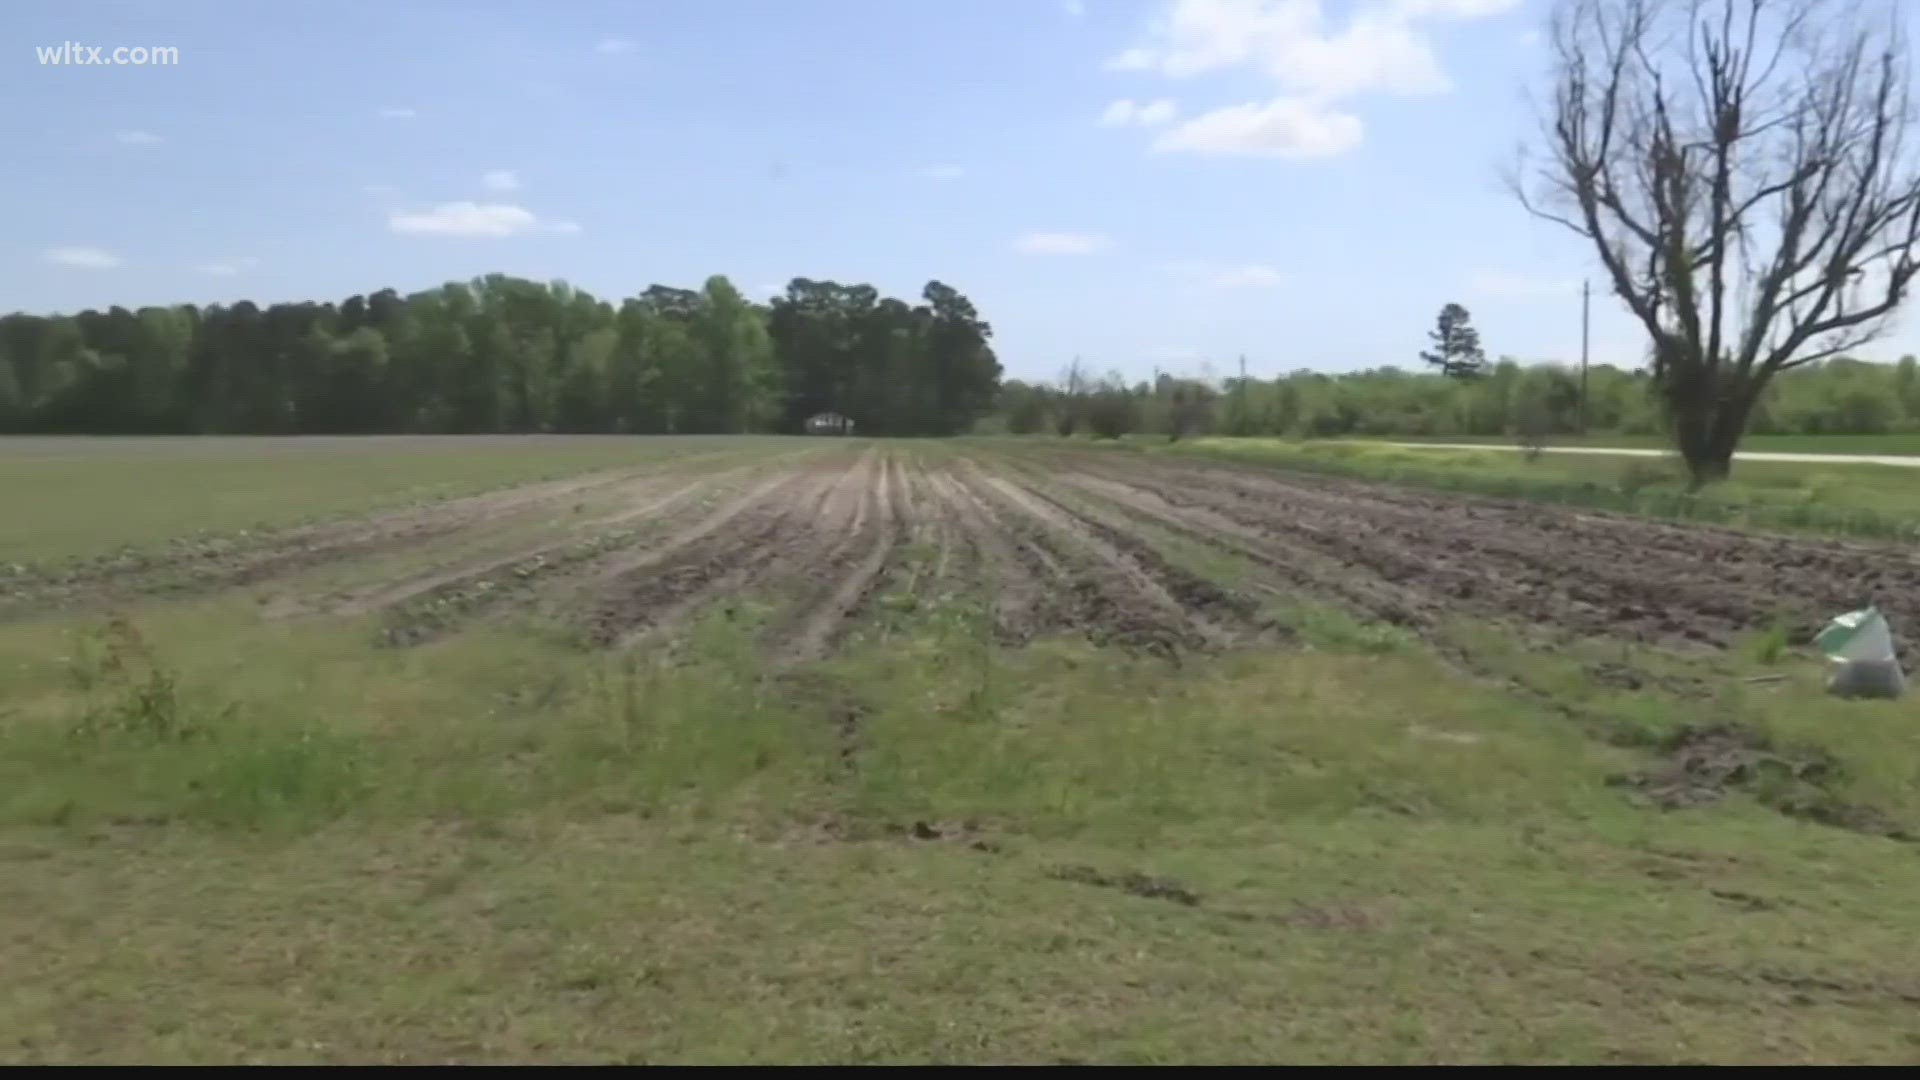 According to the US Department of Agriculture, SC has lost more than 1,000 farms between 1997 and 2017.